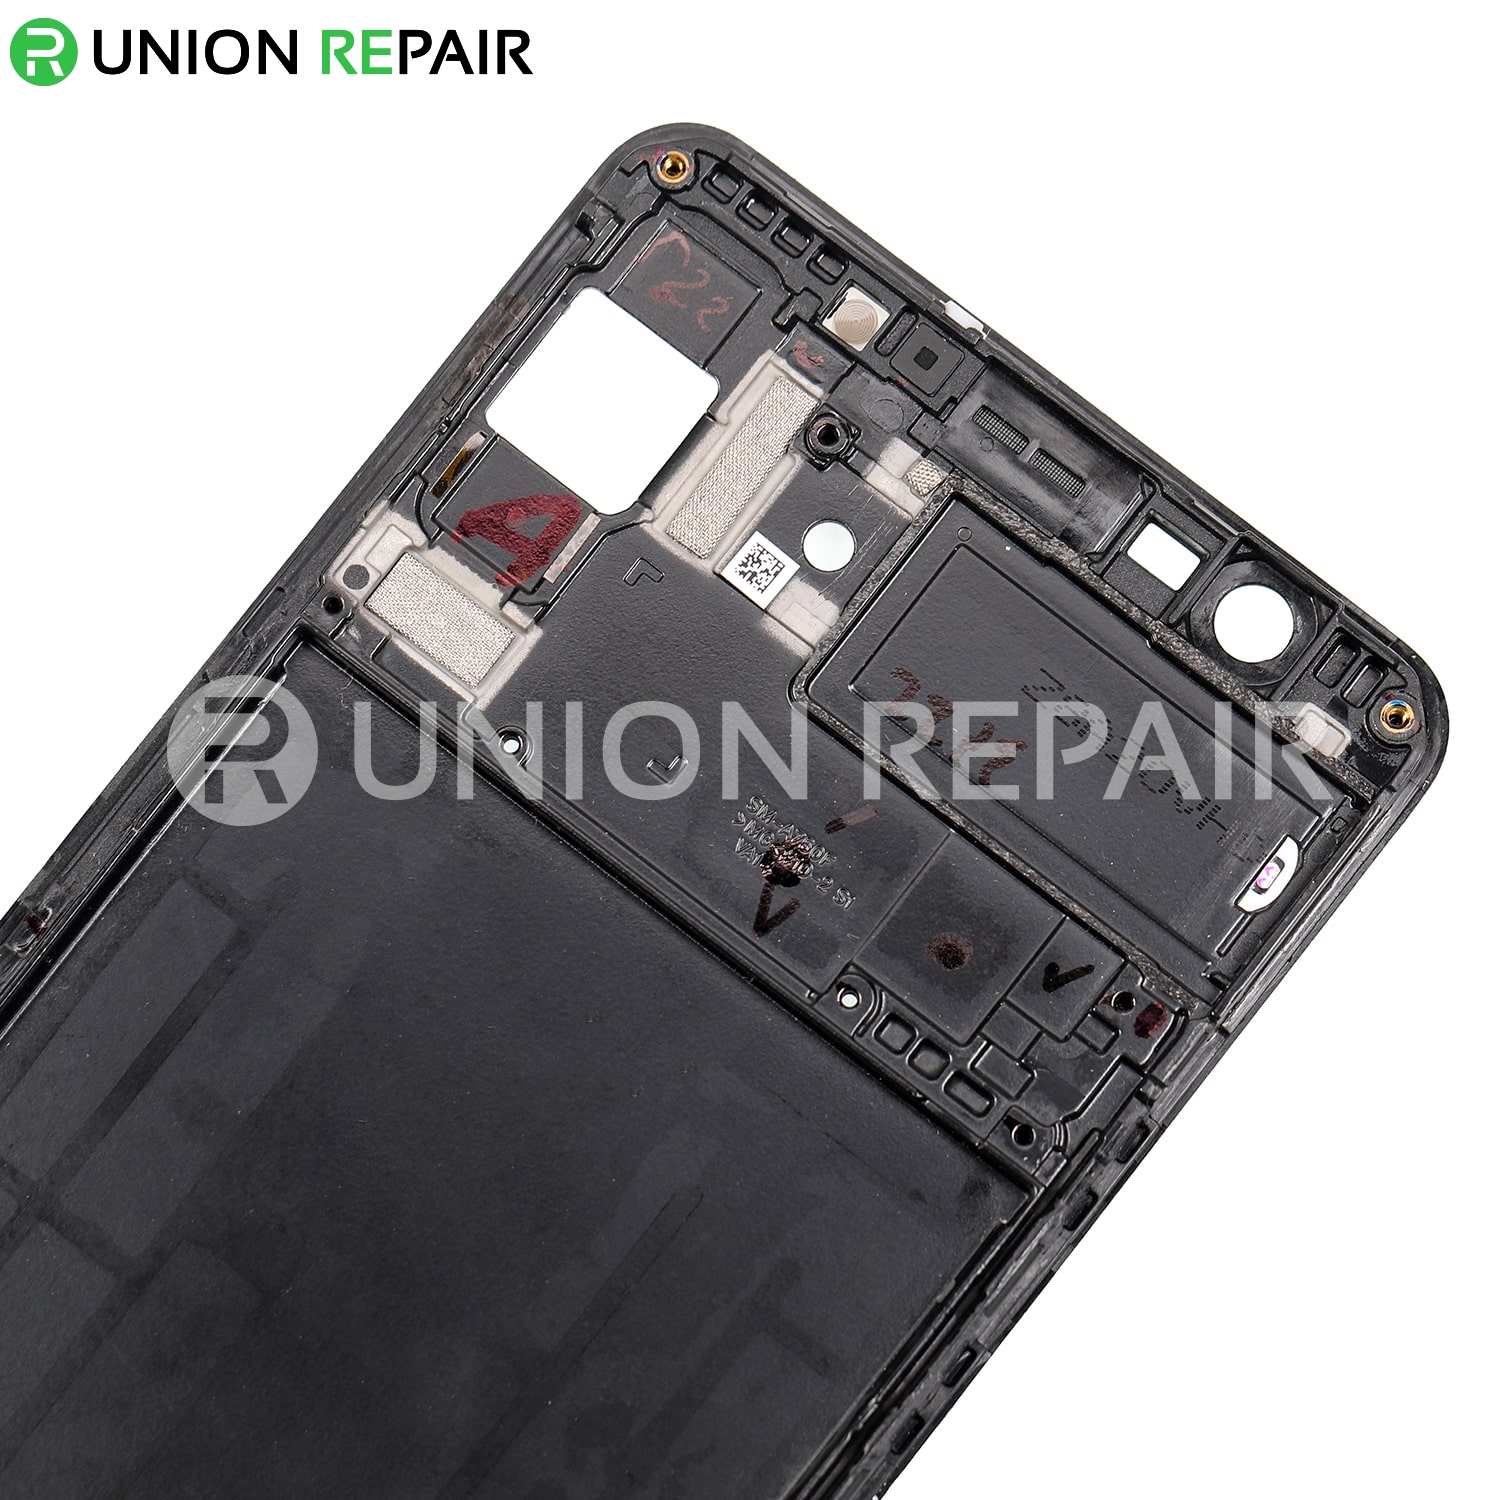 Replacement for Samsung Galaxy A7 (2018) SM-A750 Middle Plate